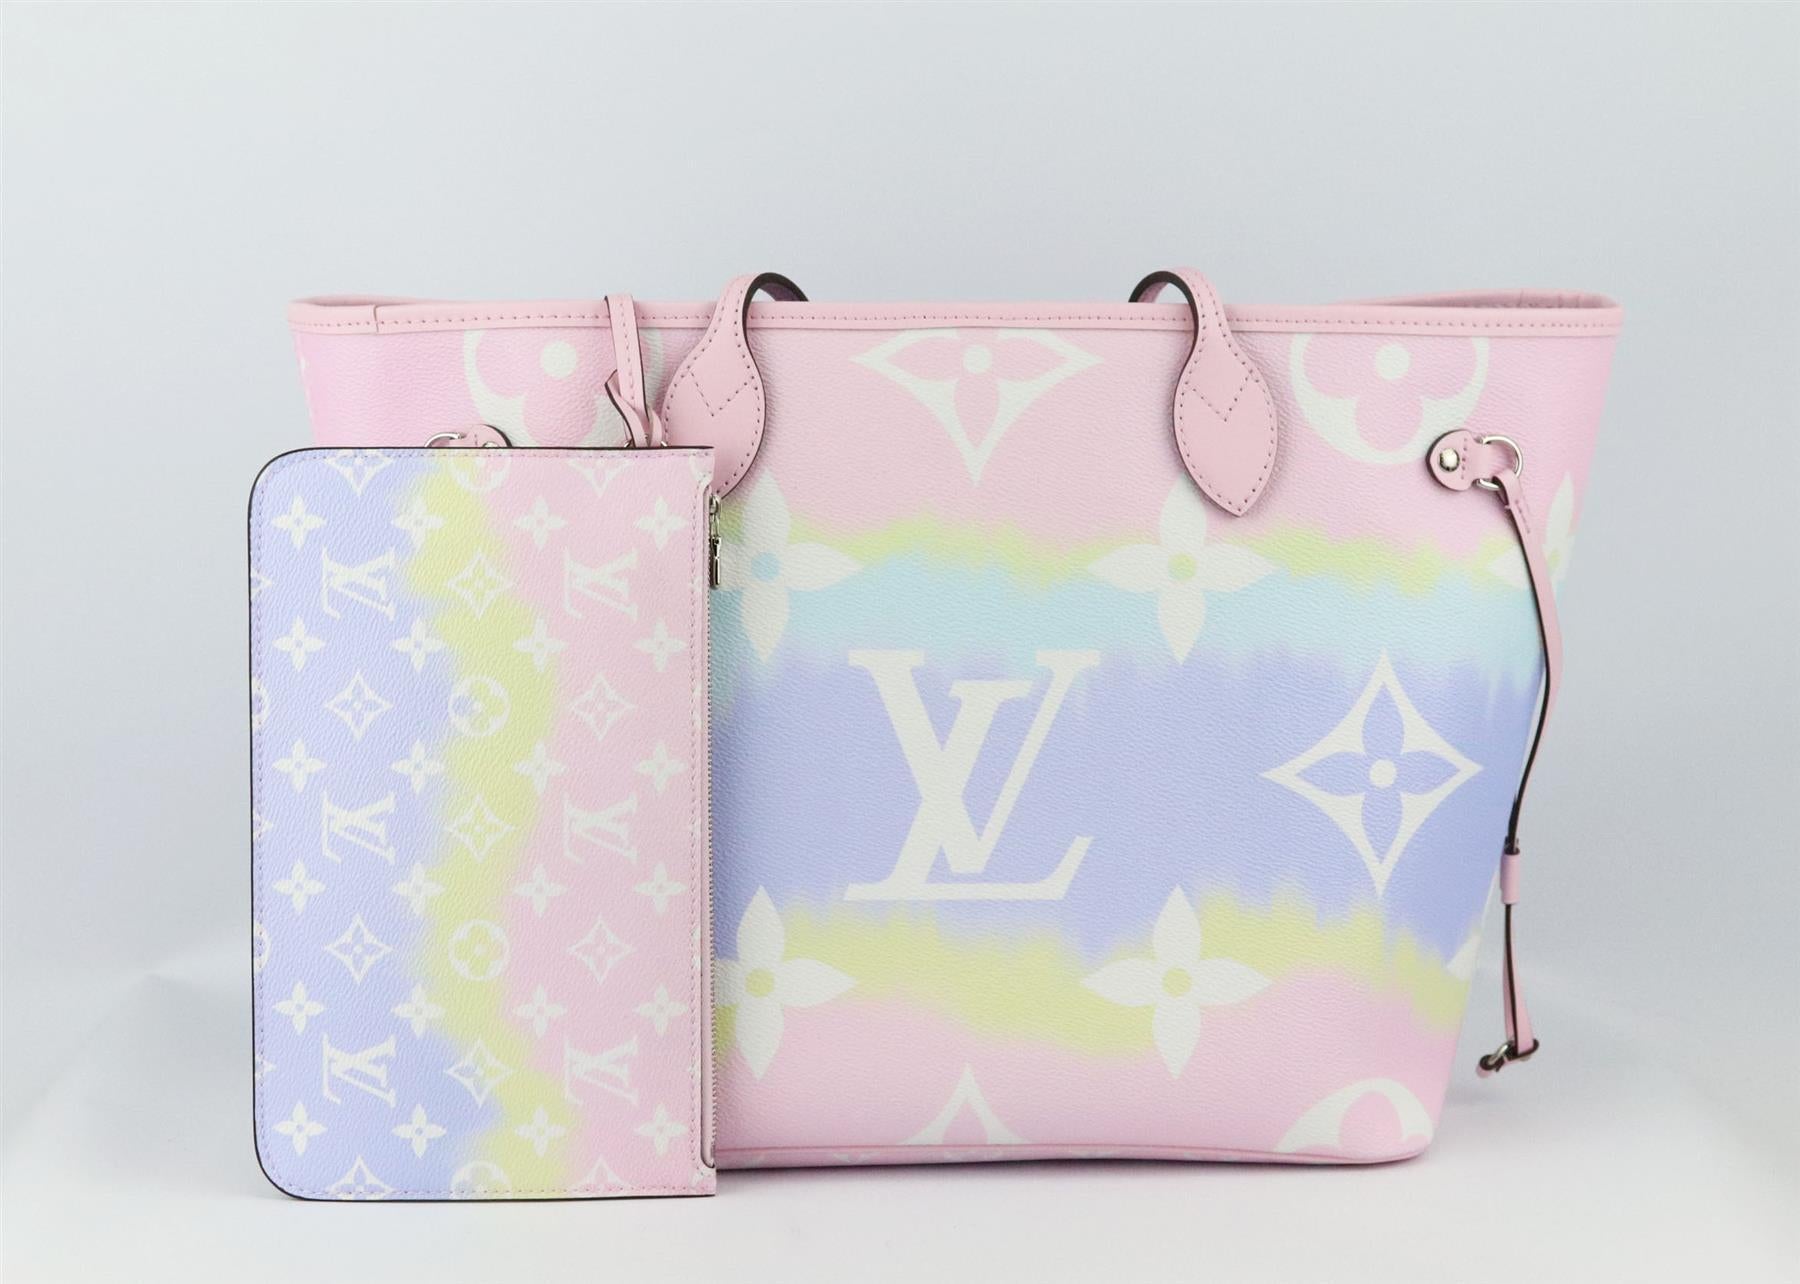 This beautiful 2020 Louis Vuitton ‘Neverfall’ MM Escale tote bag has been made from pink, blue, yellow and purple tie-dyed coated canvas and leather exterior with blue canvas interior, this piece is decorated with the brand’s iconic monogram print